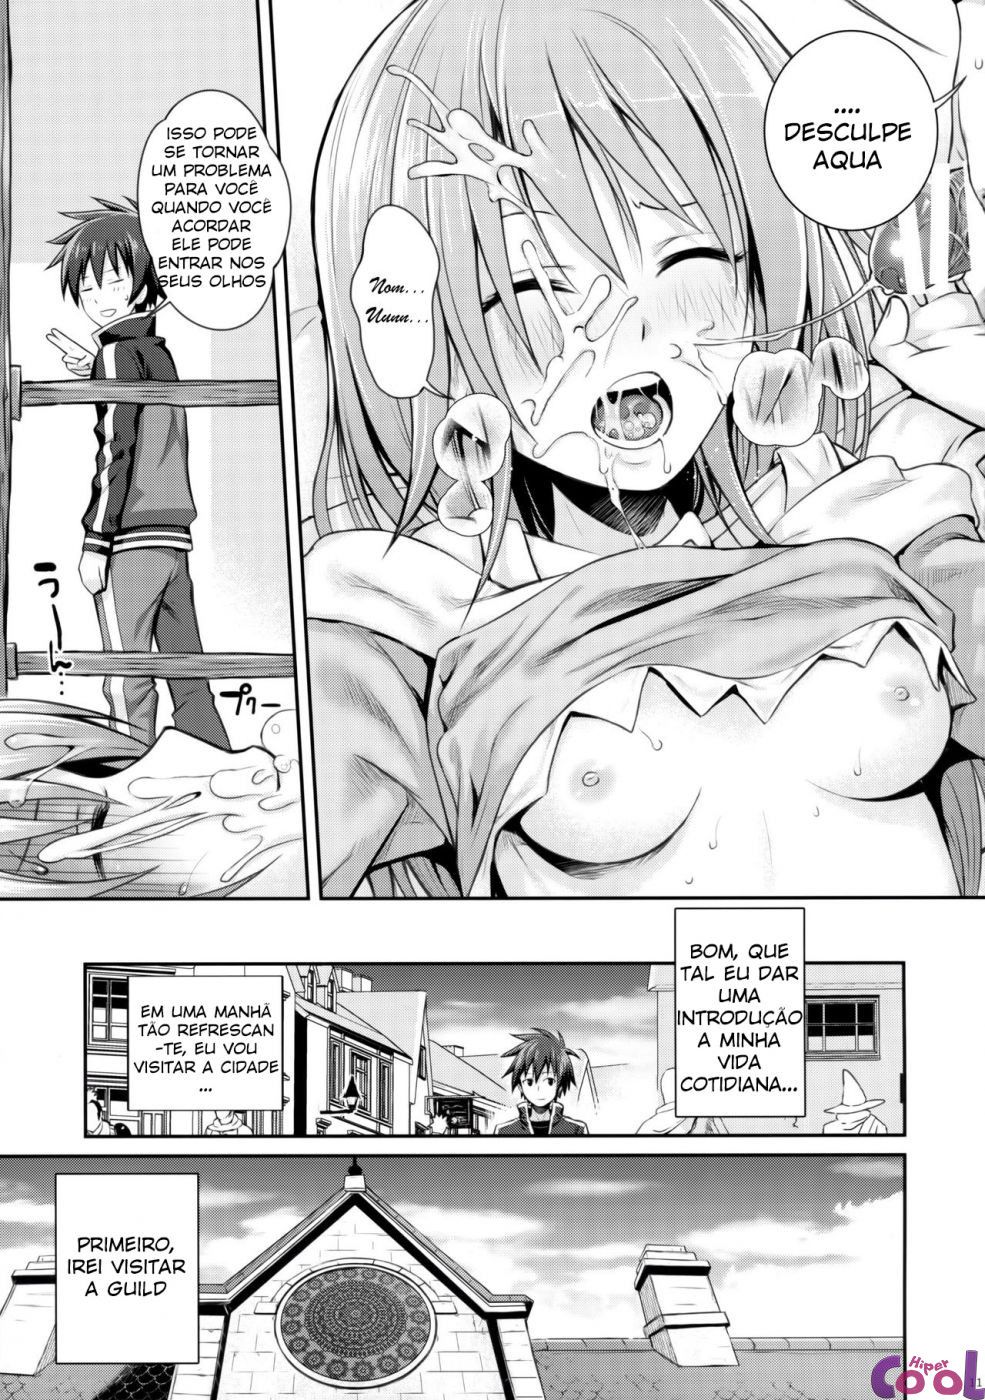 choygedo-chapter-01-page-11.jpg